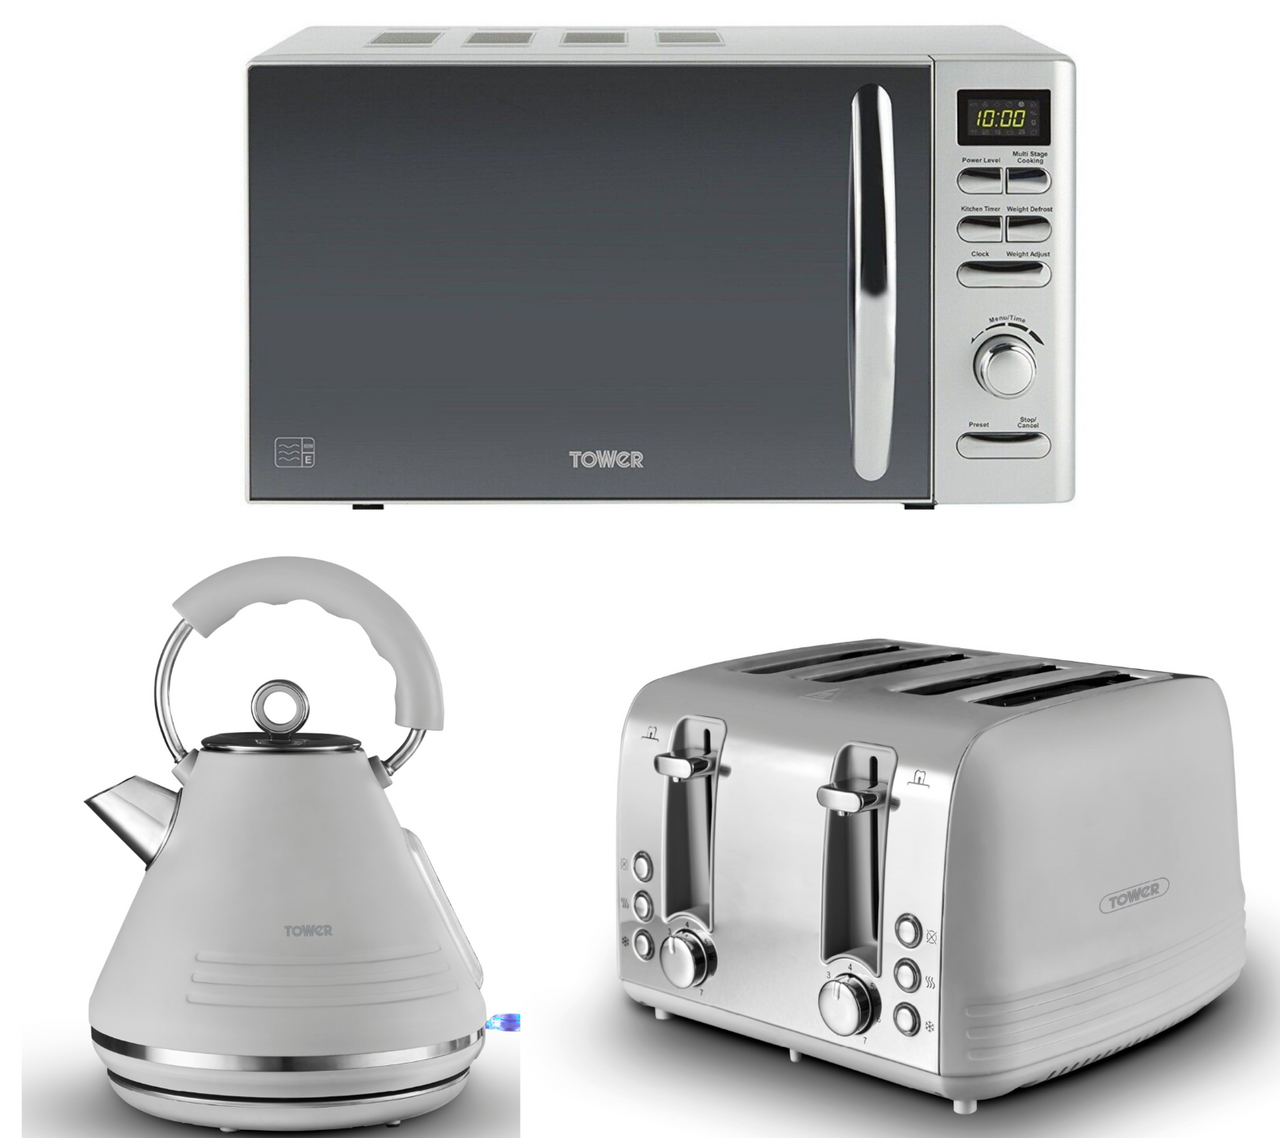 Tower Ash Grey Pyramid Kettle, 4 Slice Toaster & Tower T24019S Silver Microwave